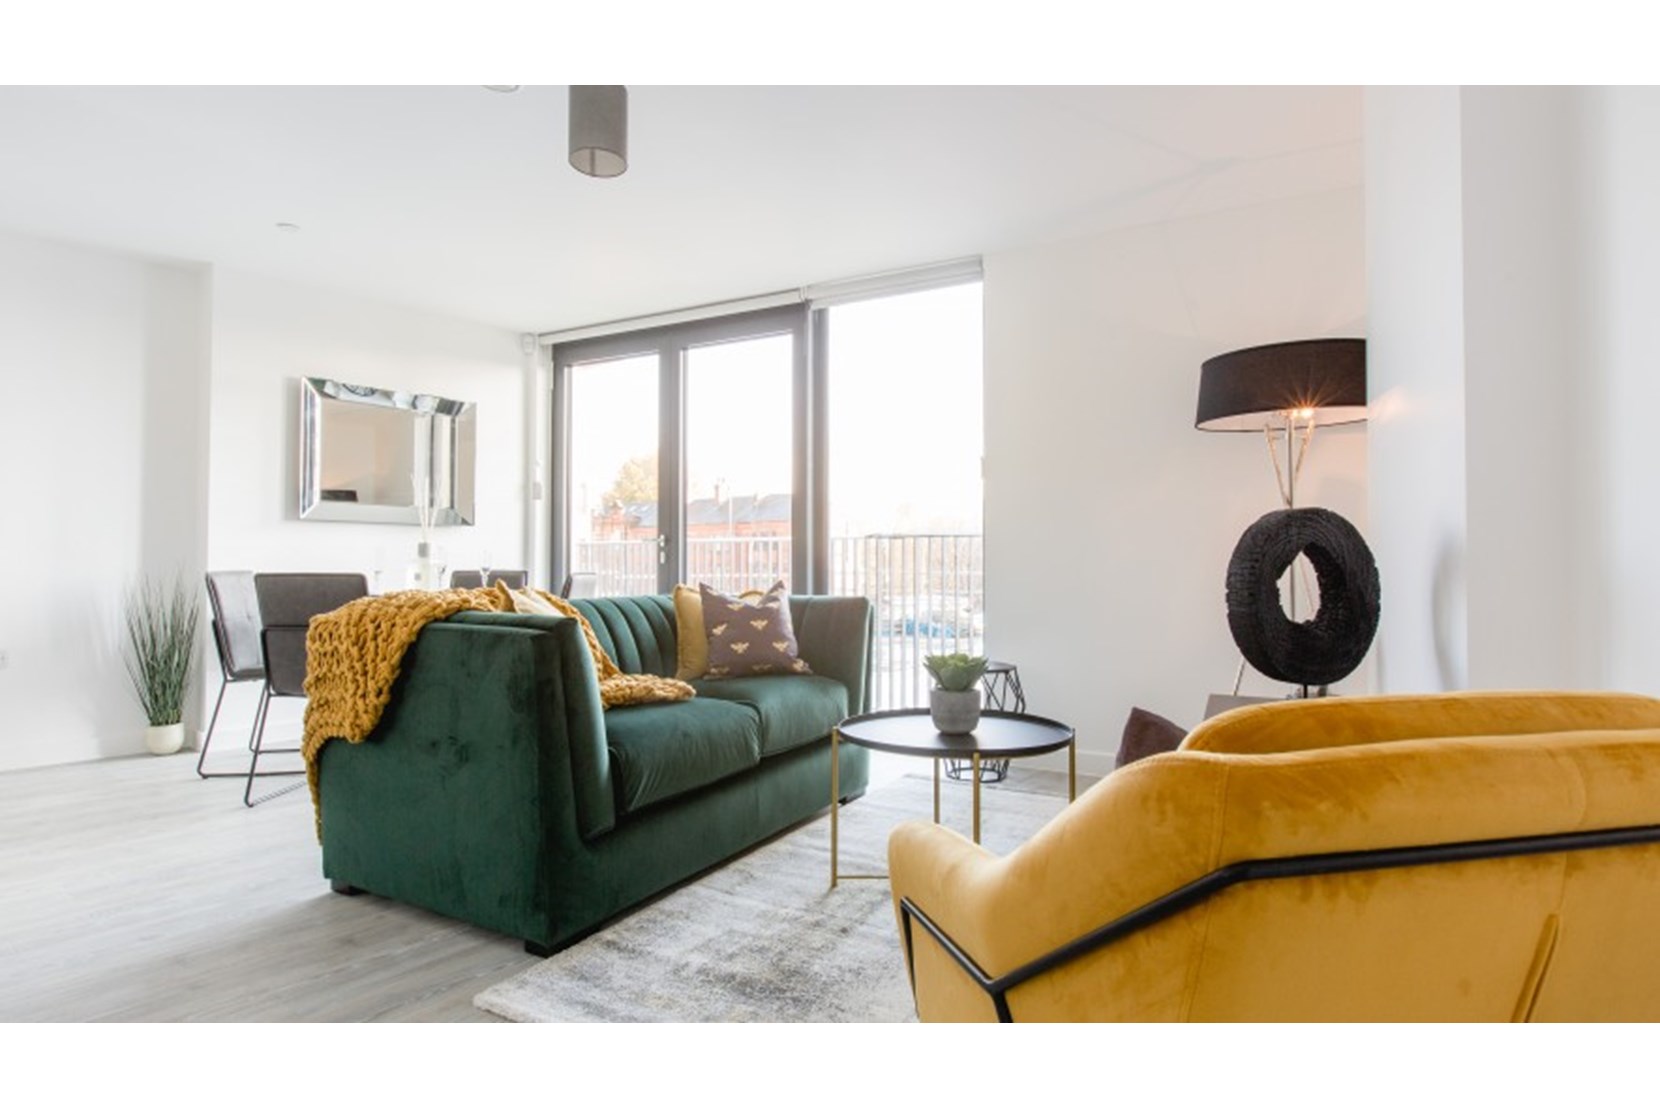 Apartments to Rent by Allsop at Vox, Manchester, M15, living area